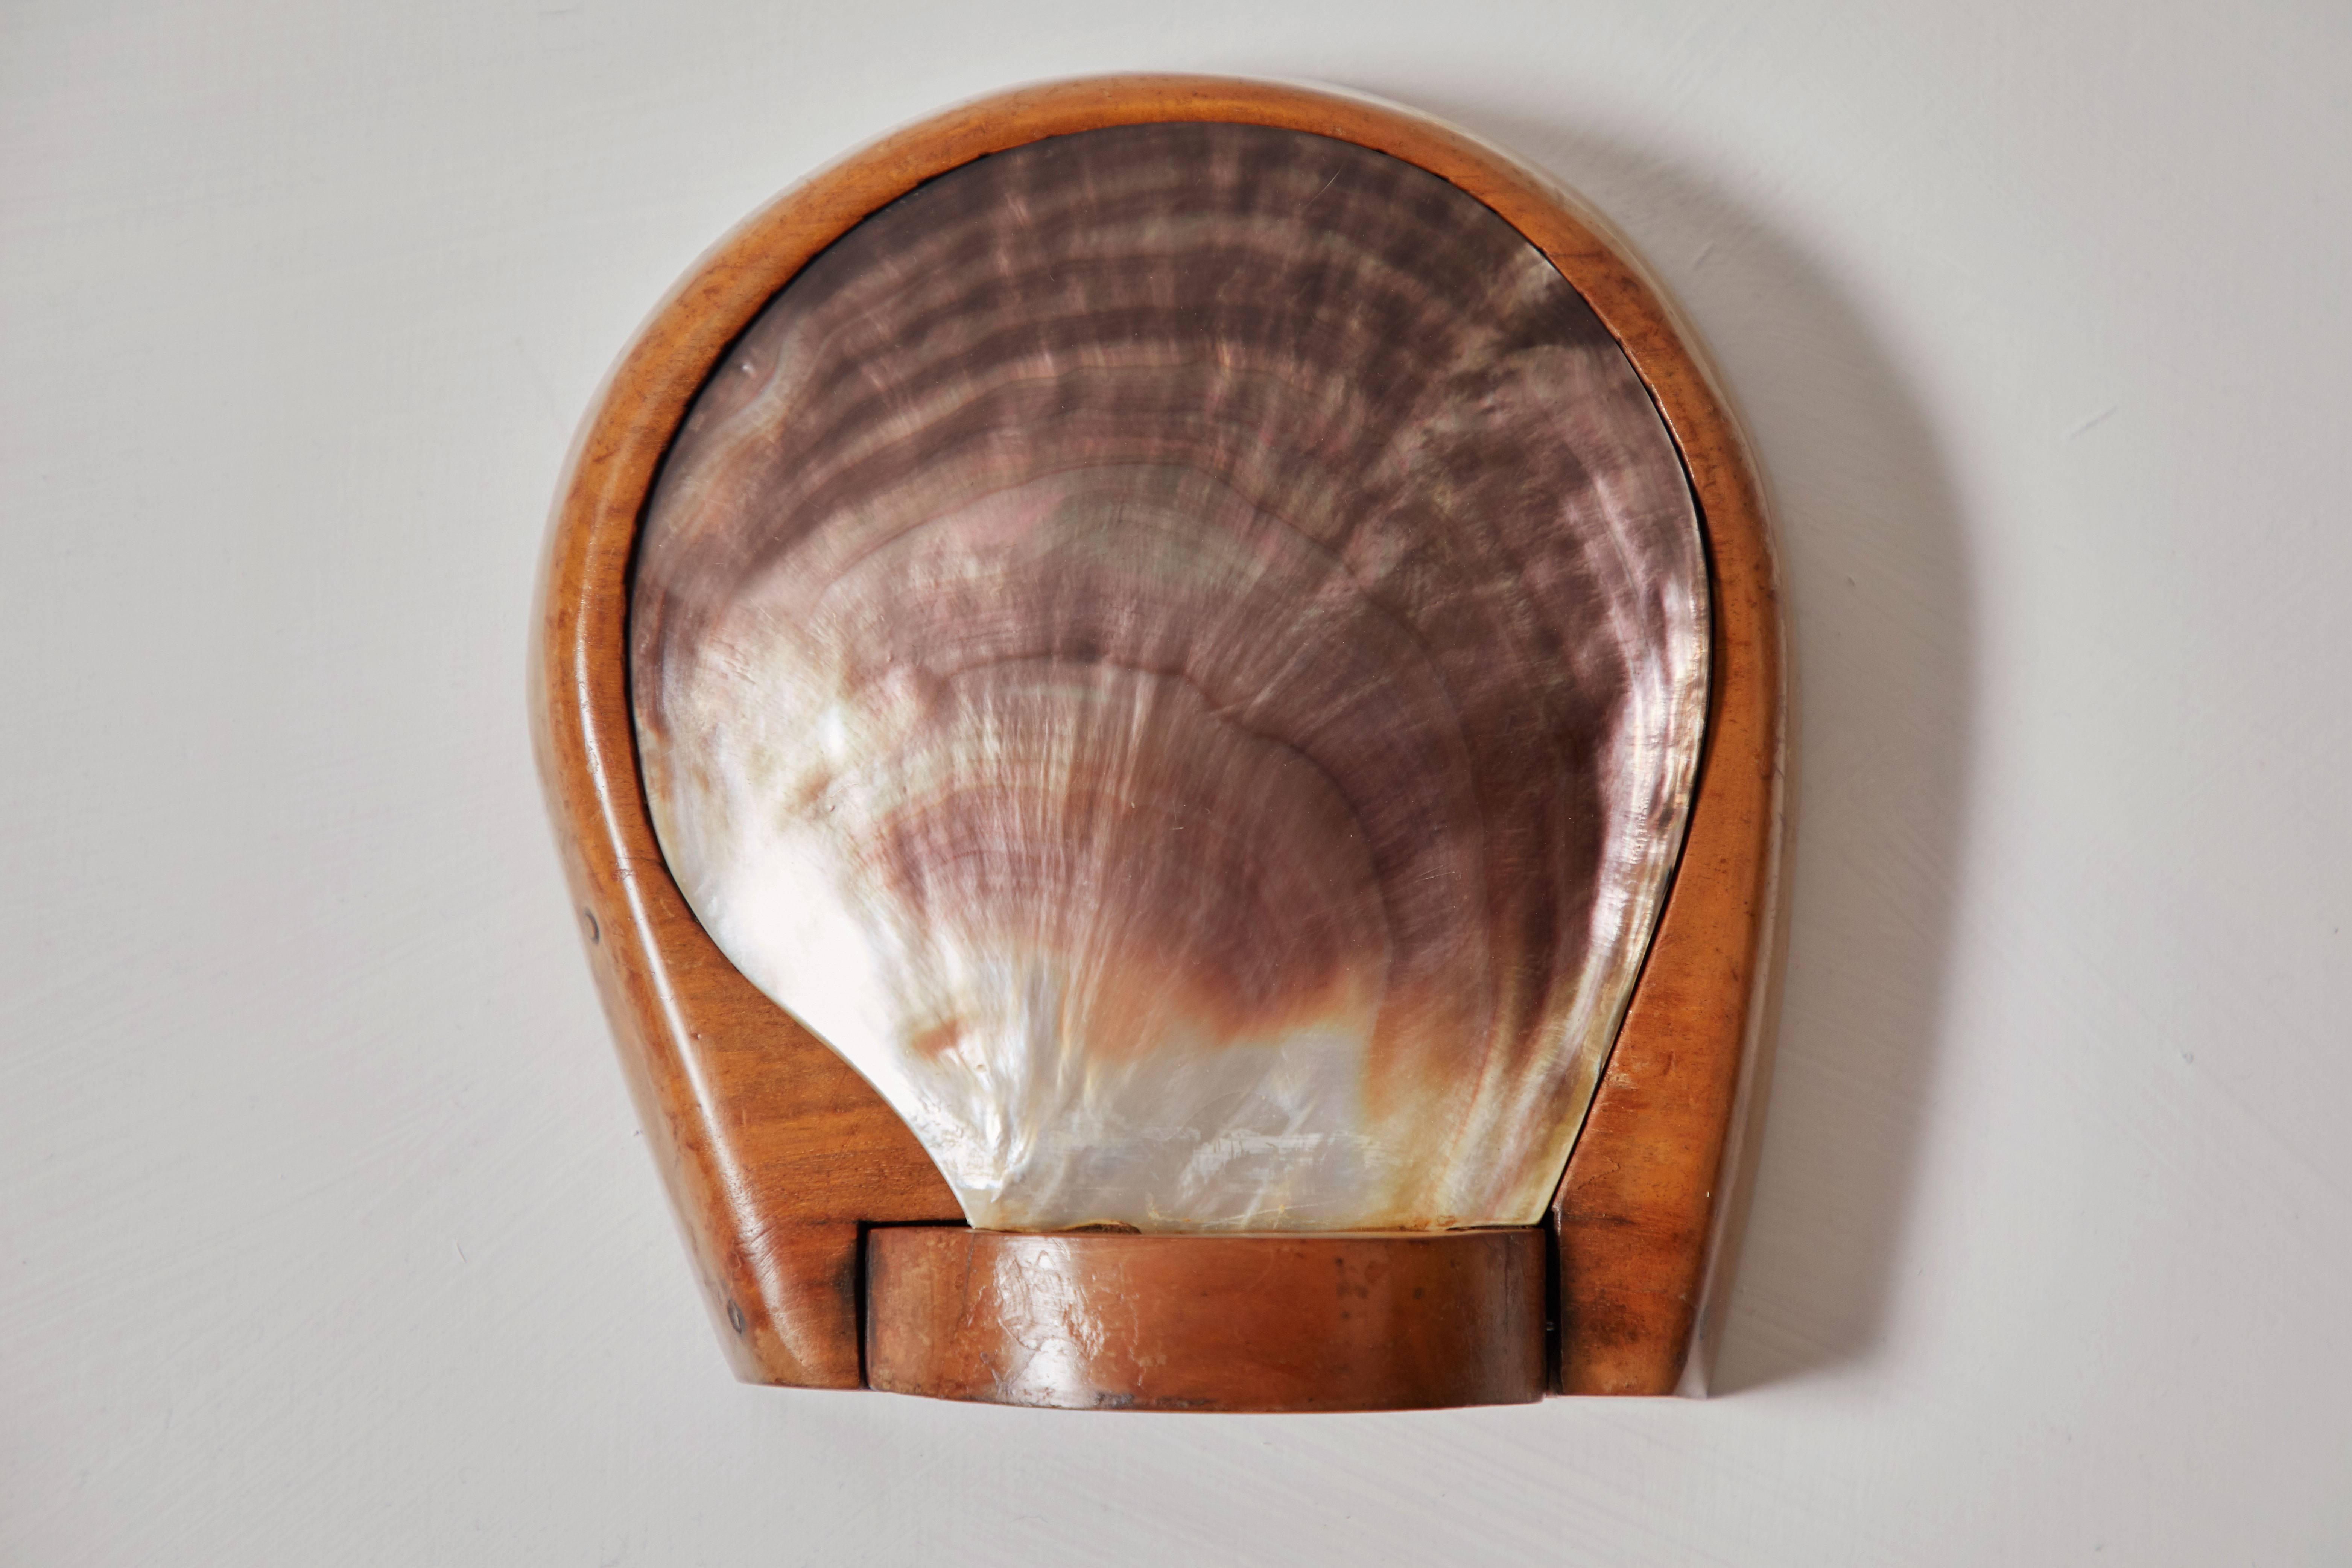 Hand-carved wood and abalone shell lidded box attributed to Alexandre Noll. Made in France, circa 1950s.